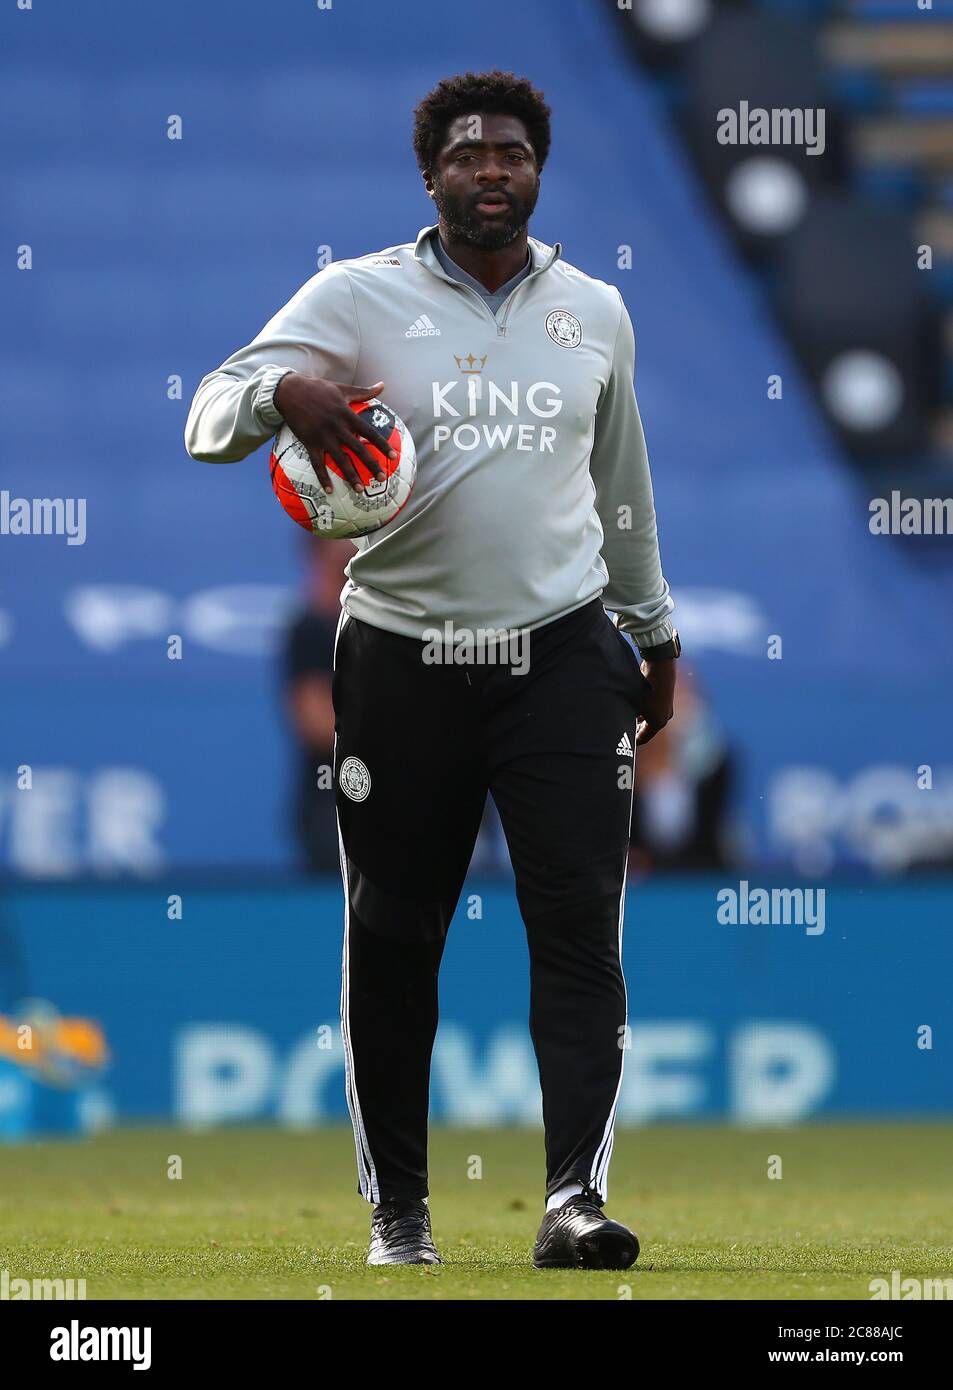 Leicester City First Team Coach, Kolo Toure - Leicester City v Sheffield  United, Premier League, King Power Stadium, Leicester, UK - 16th July 2020  Editorial Use Only - DataCo restrictions apply Stock Photo - Alamy